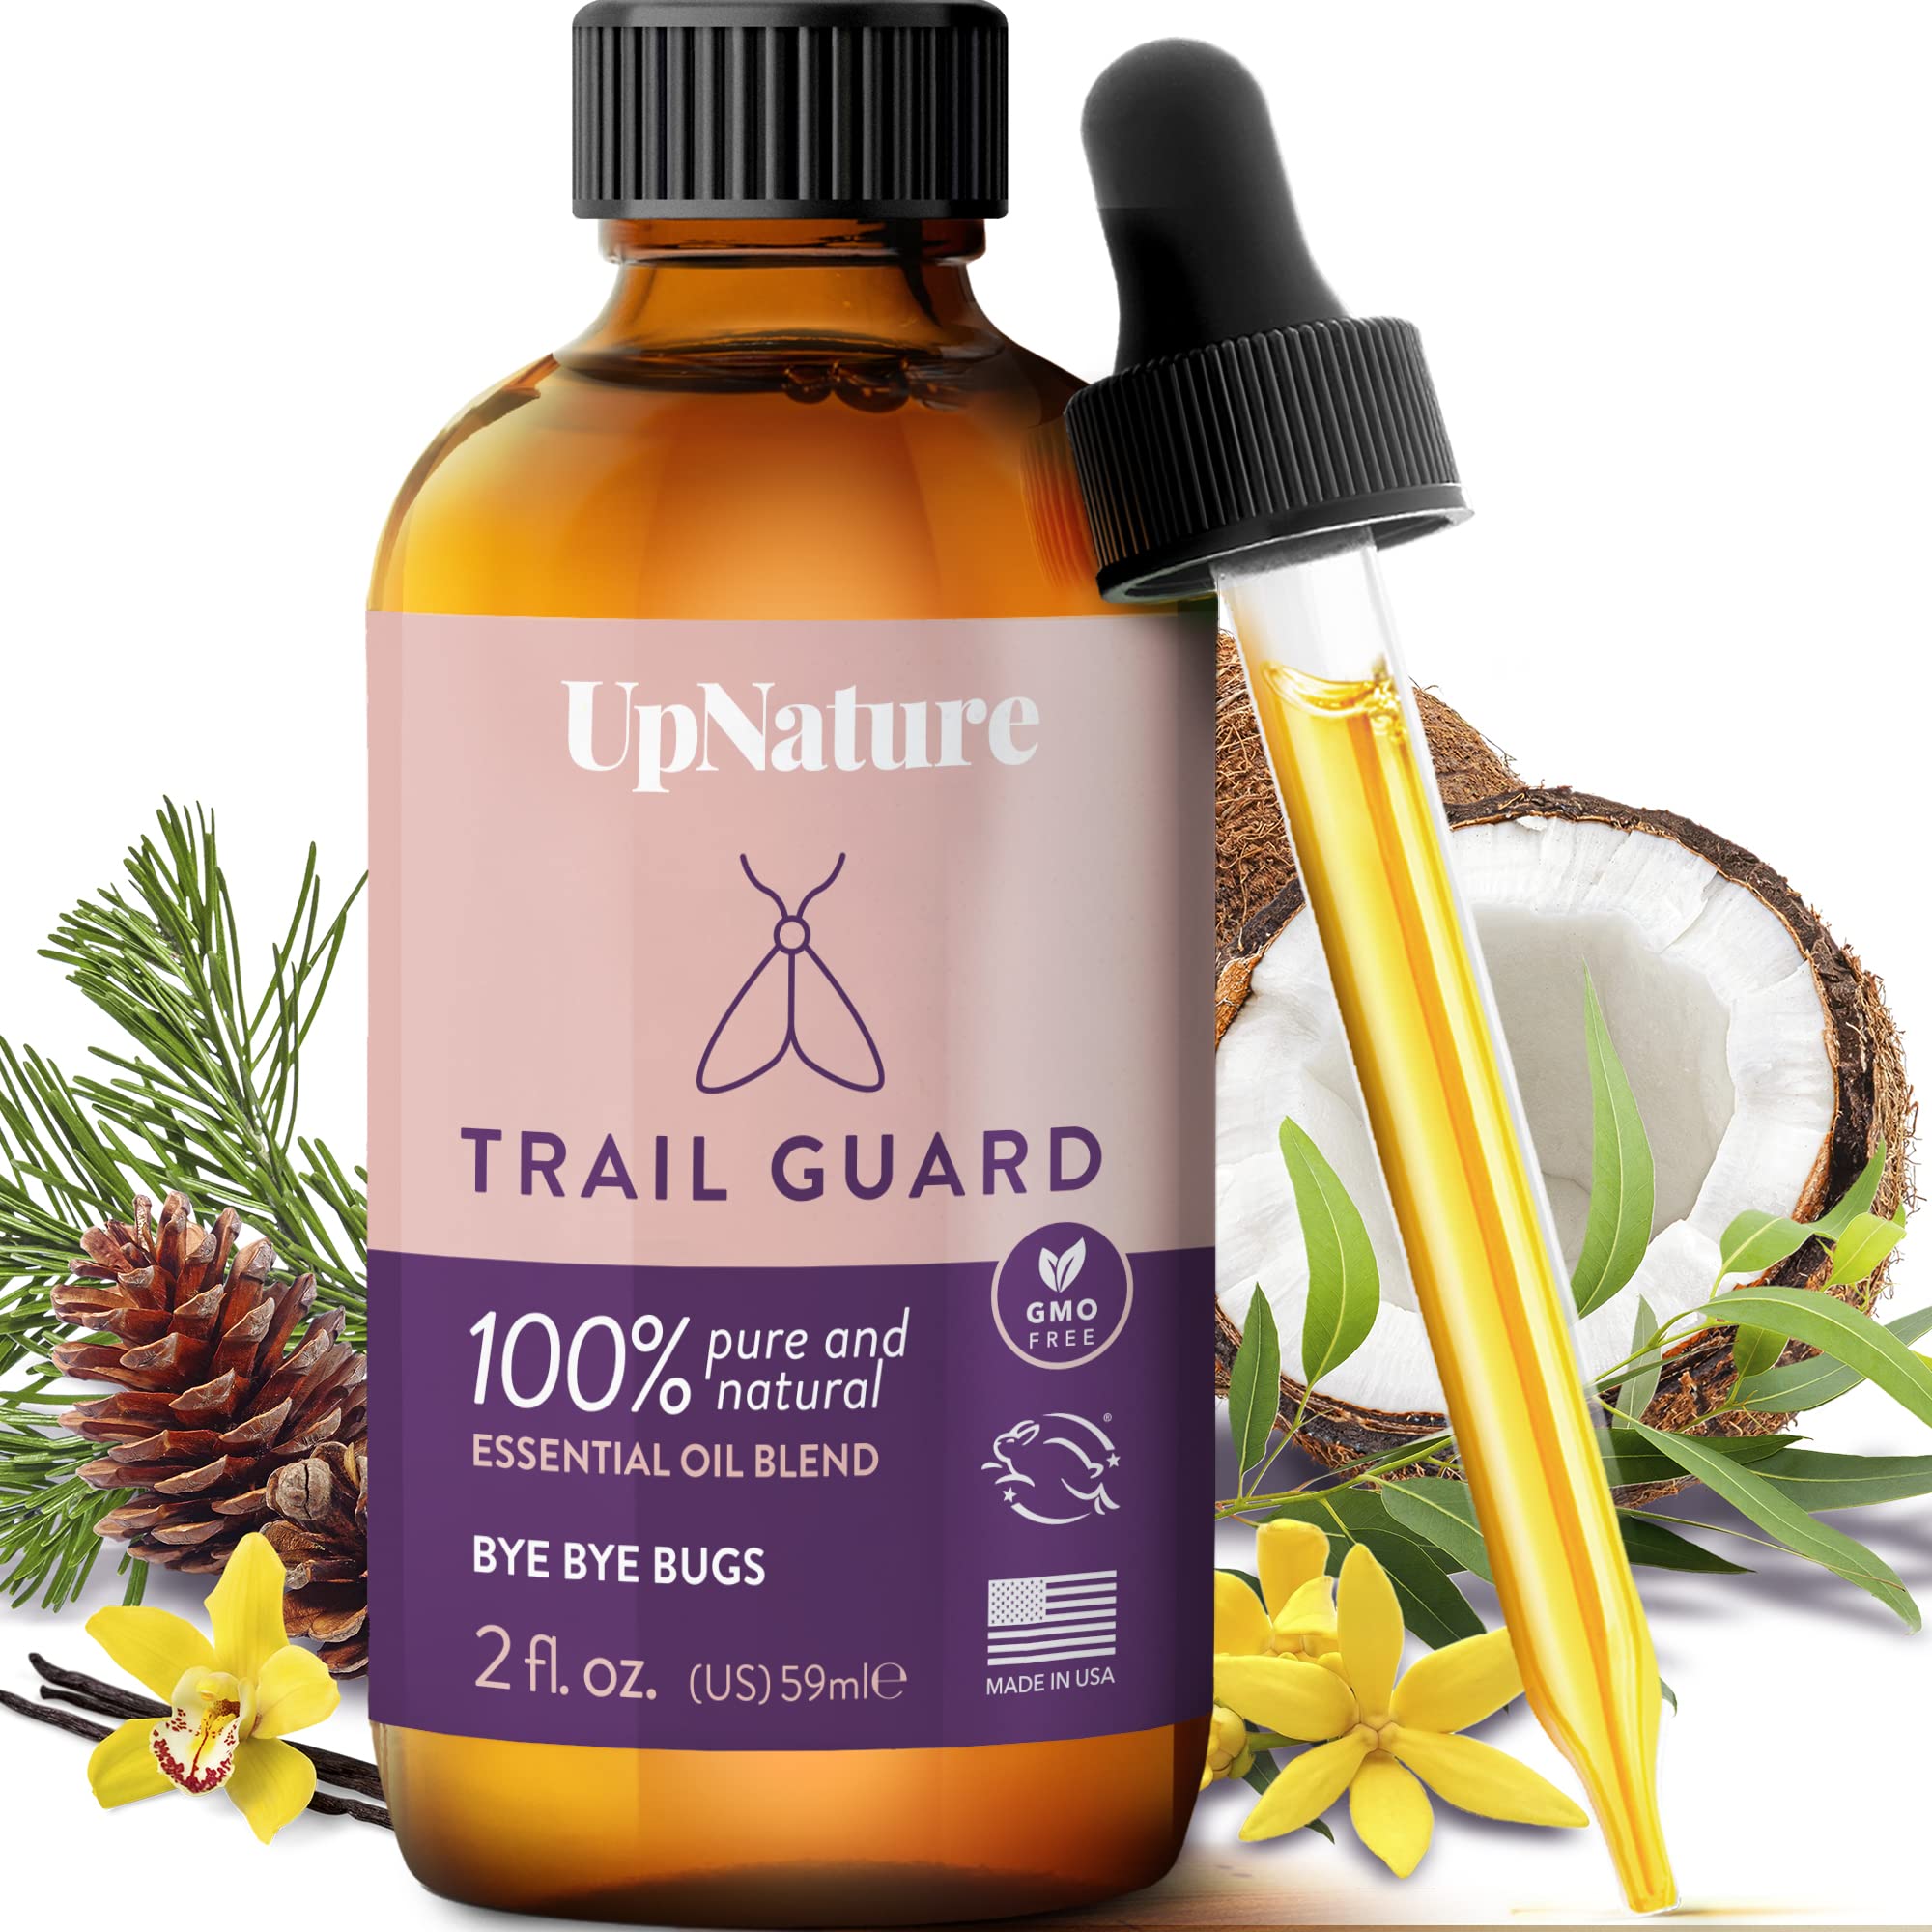 Trail Guard Essential Oil Blend 2oz - Outdoor & Camping Essentials - Keeps Mosquitoes, Bugs & Insects Away Naturally with Eucalyptus Essential Oil, Ylang-Ylang Essential Oil & Vanilla Essential Oil